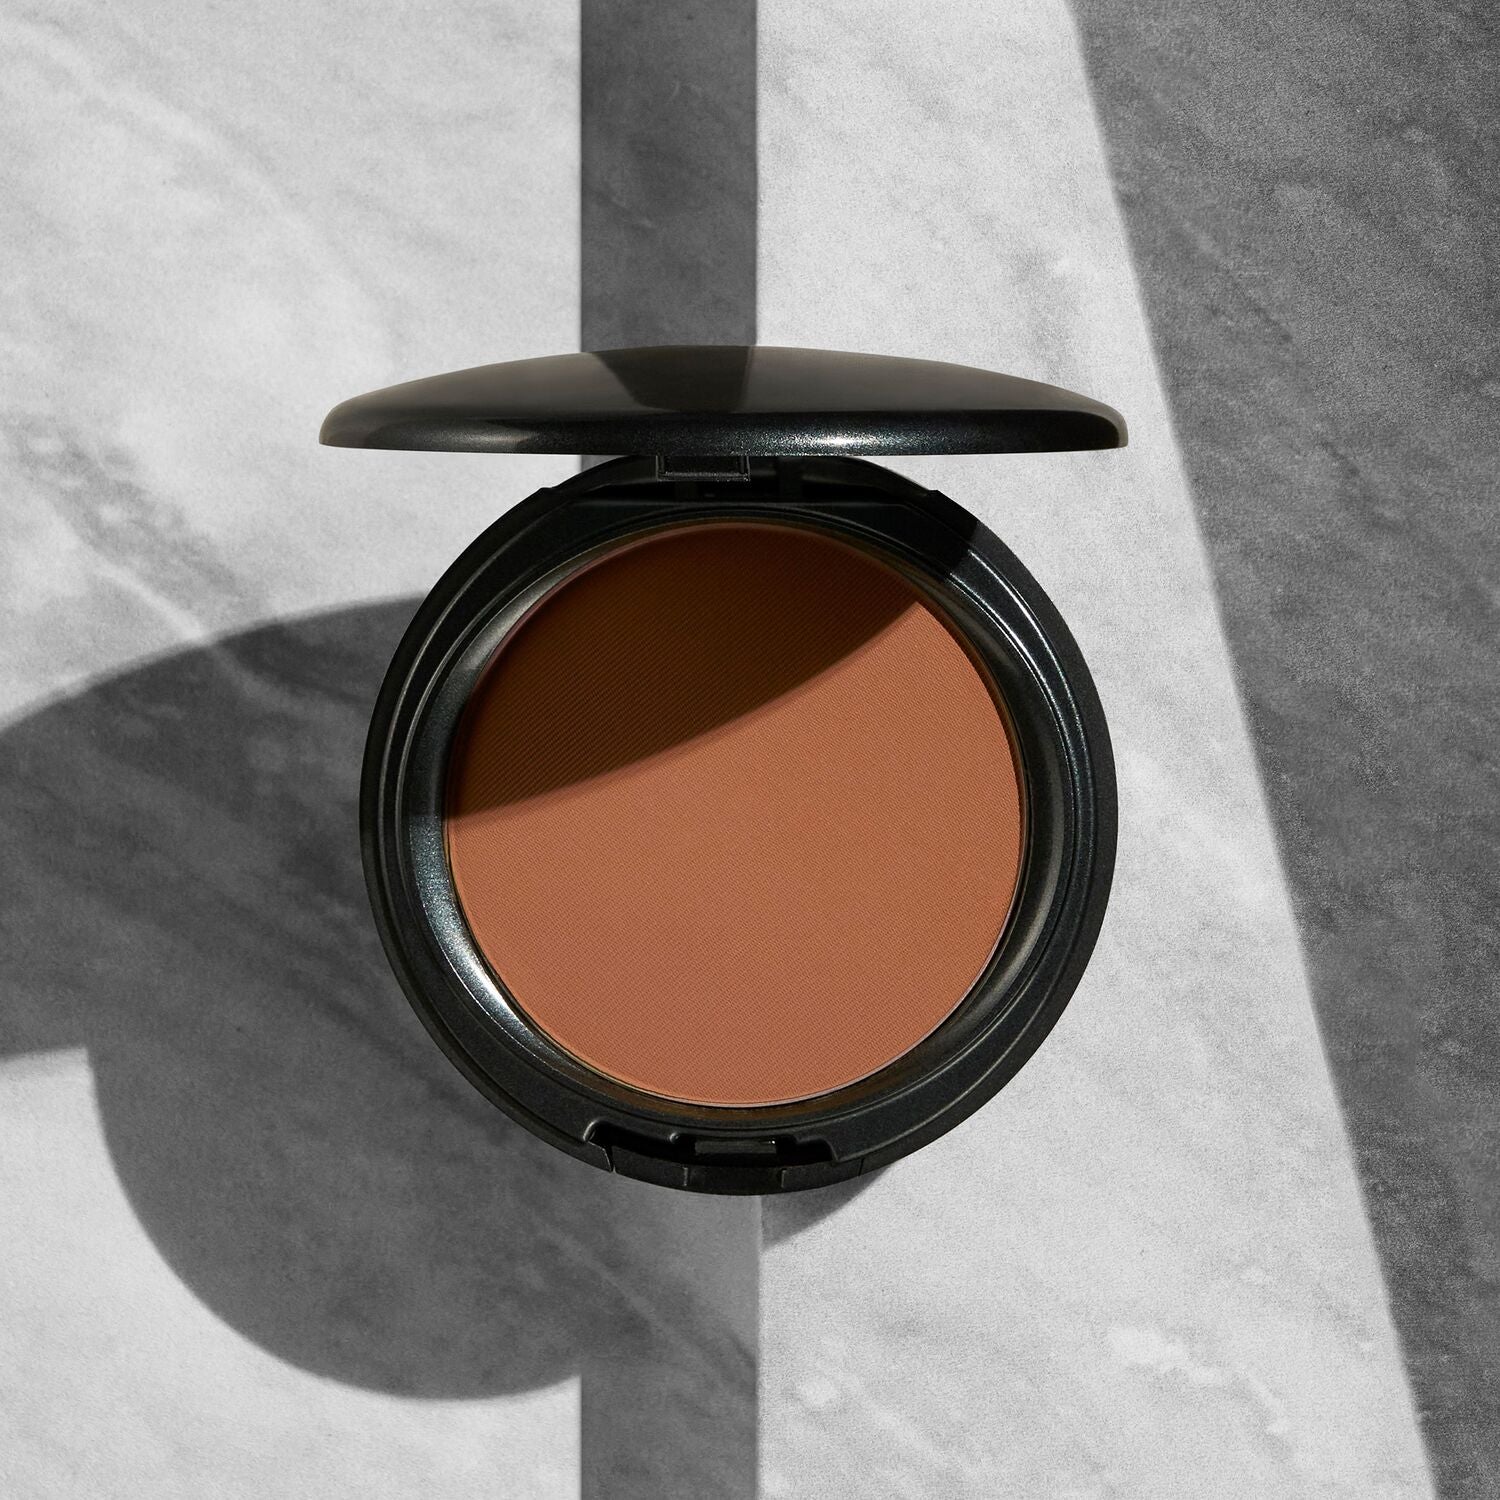 Coverfx Pressed Mineral Foundation in shade D2